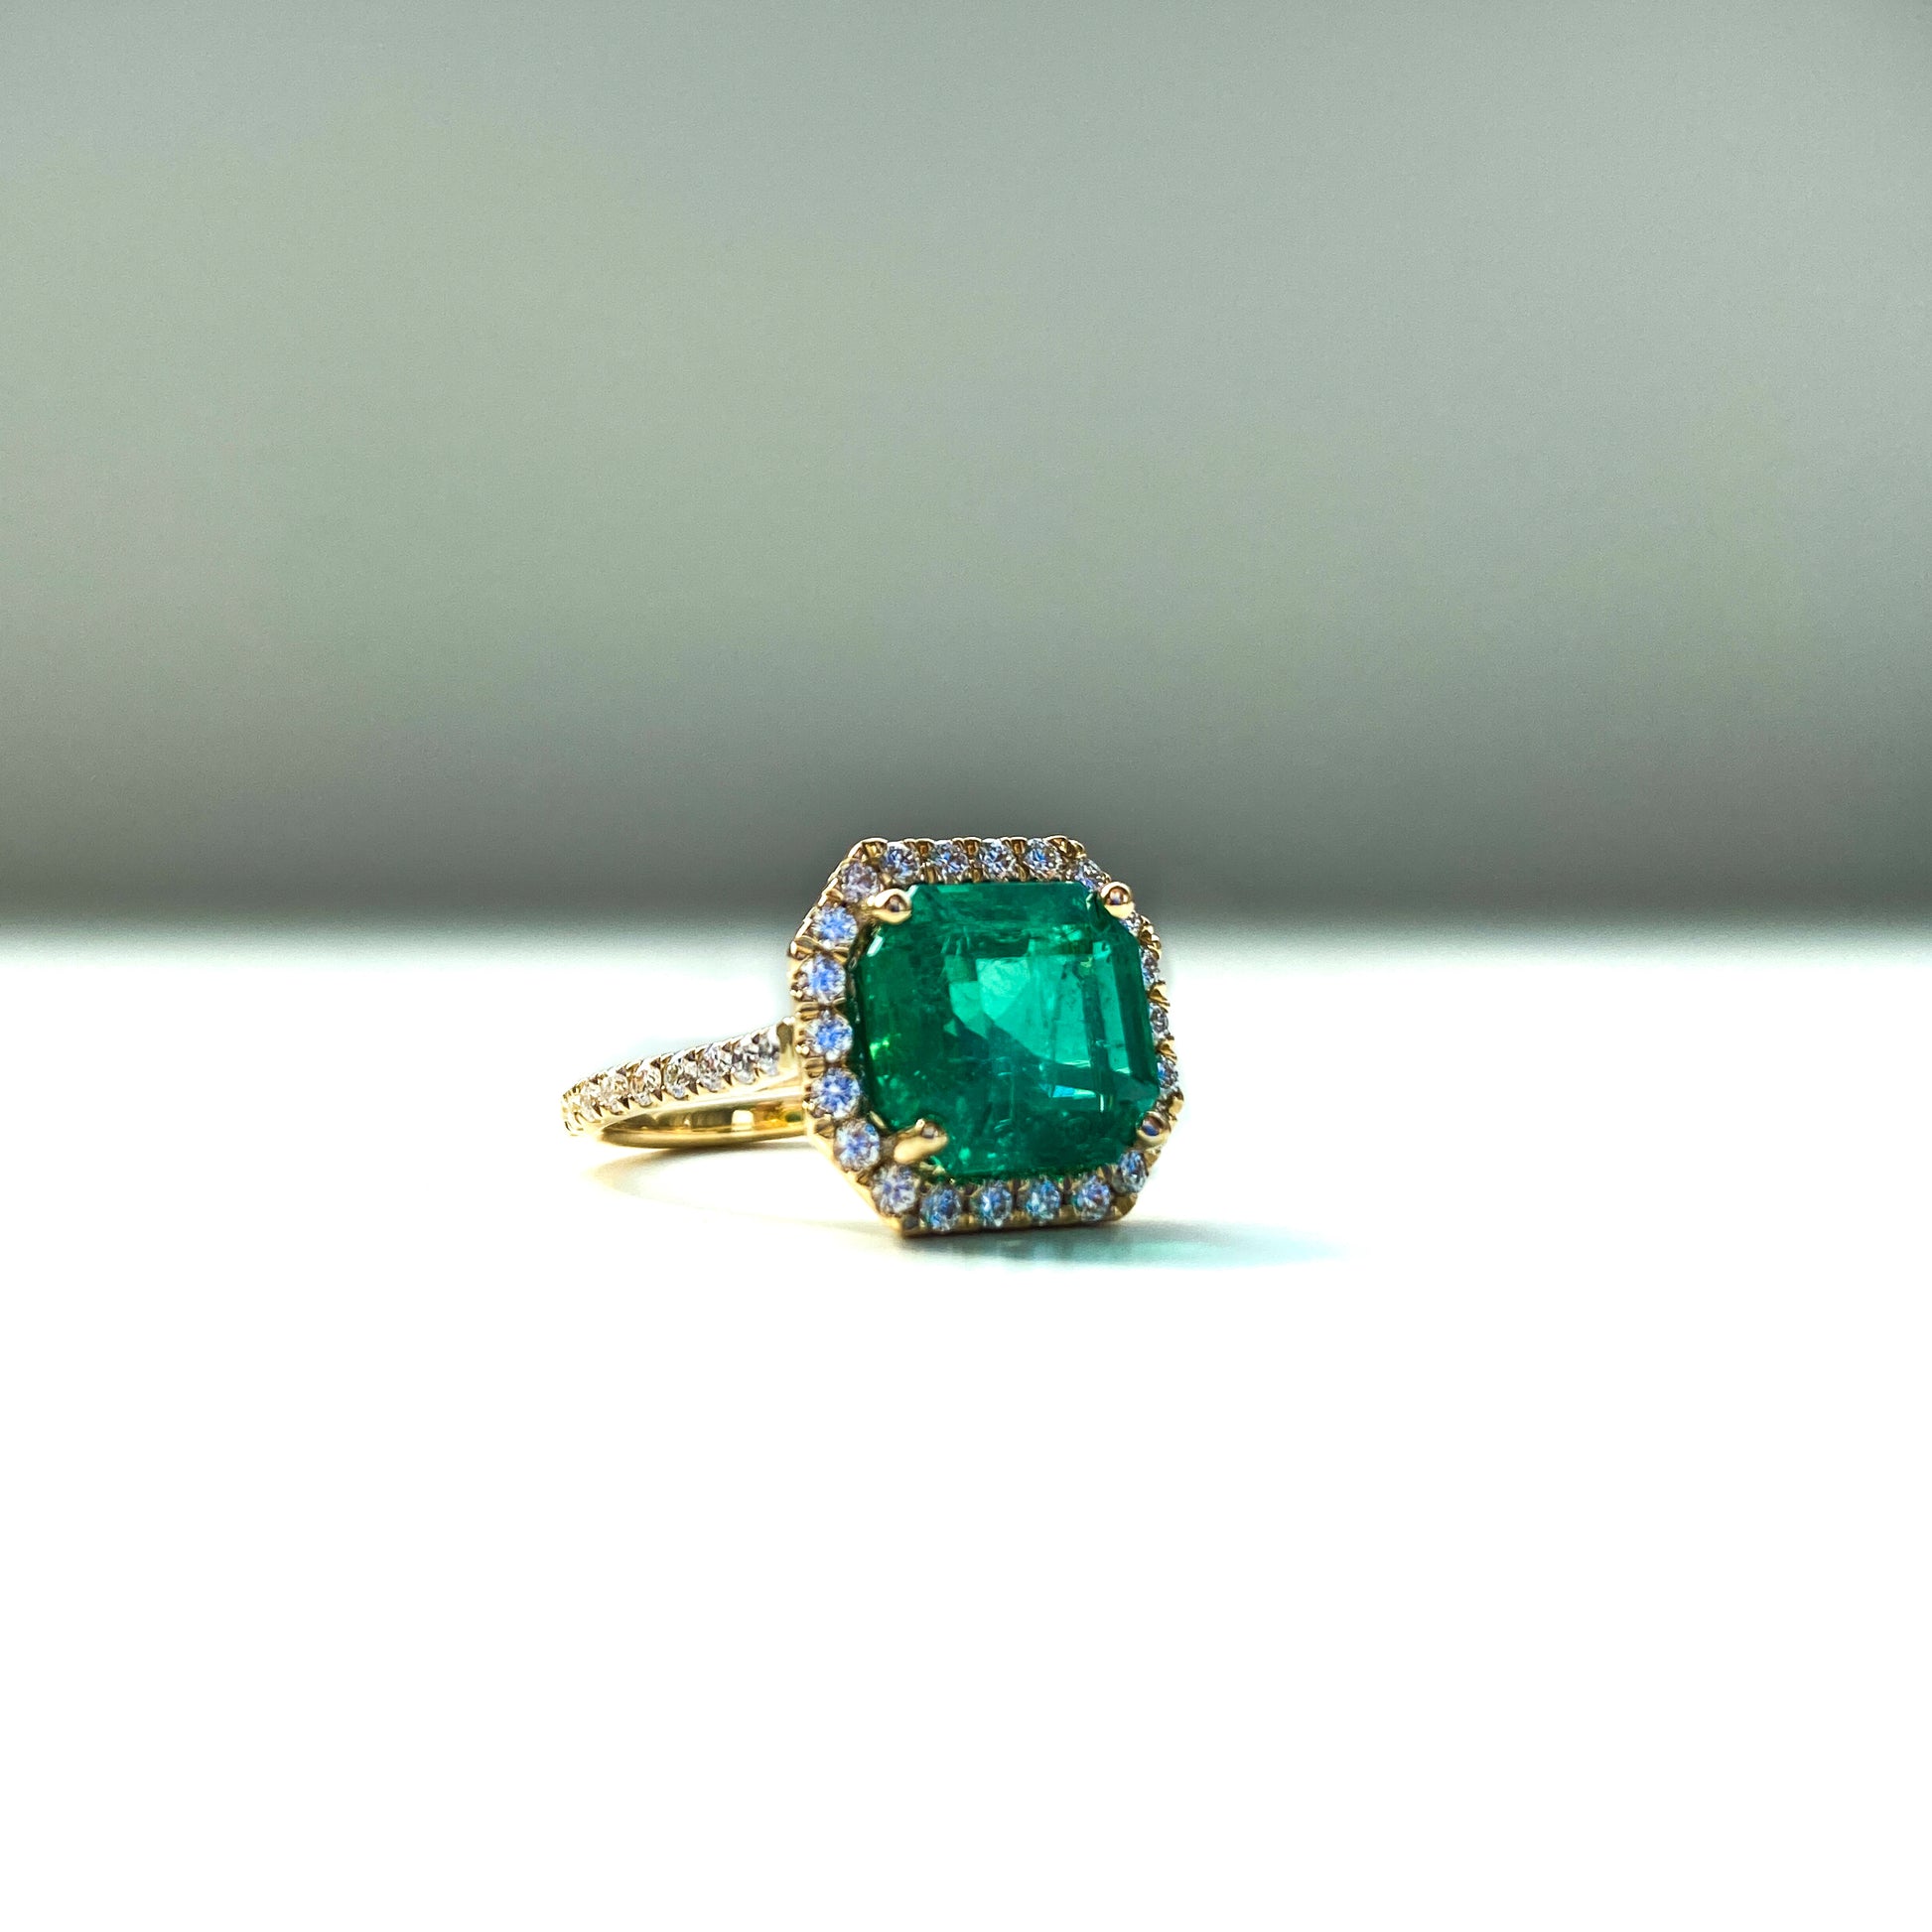 emerald and diamond ring, emerald engagement ring, emerald ring, diamond band, diamond ring, hong kong engagement ring, zambian emerald, cocktail ring, delicate emerald ring, colombian emerald ring, hong kong engagement ring, 翡翠戒指, 祖母绿戒指, 香港珠宝, 订婚戒指, 钻戒, 钻石,  古董钻石, emerald and yellow diamond ring, yellow diamonds, yellow diamond, colour diamond, muzo emerald